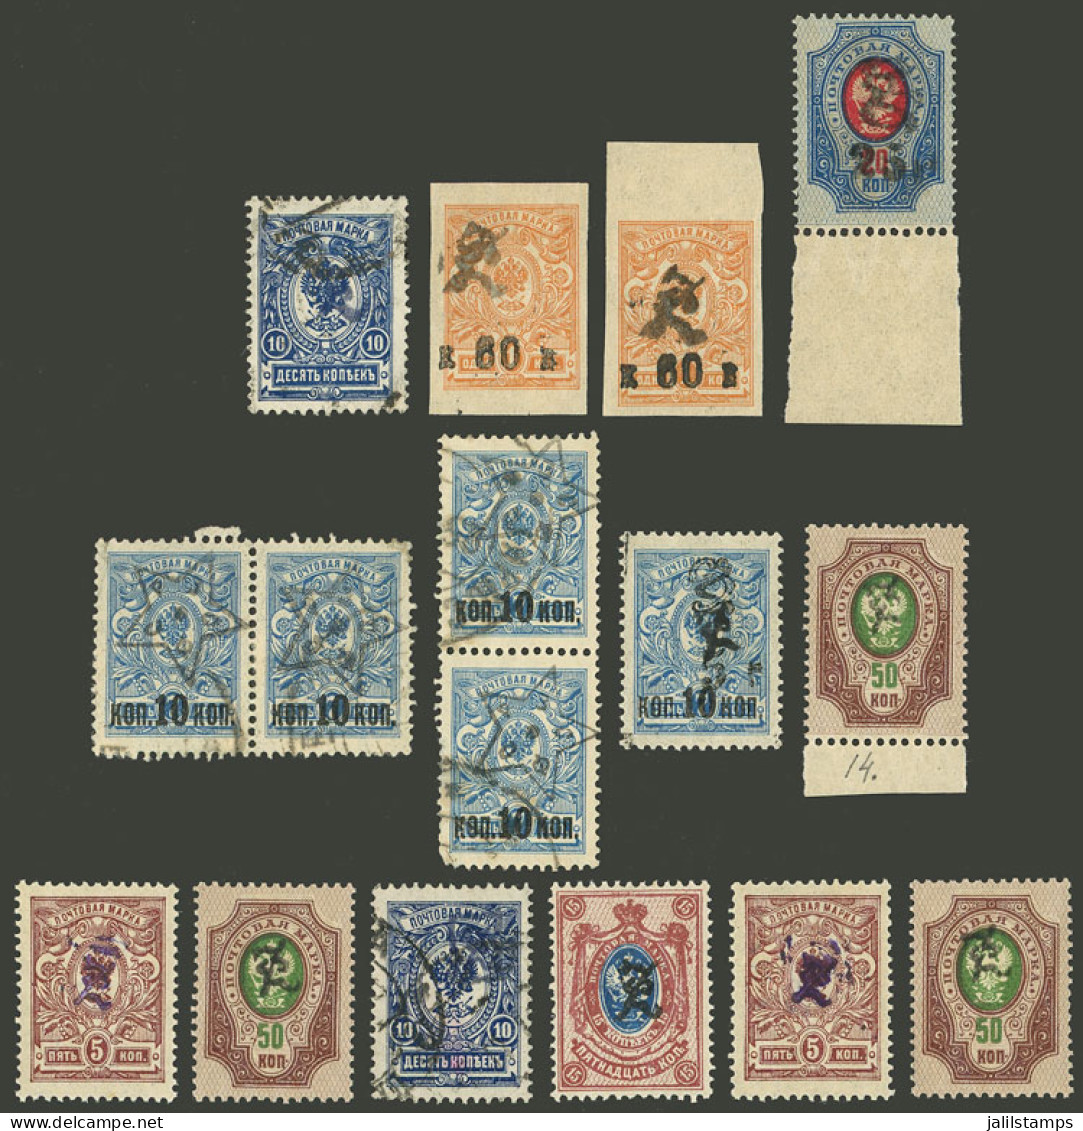 ARMENIA: Interesting Group Of Old Stamps, Used Or Mint (many MNH), Excellent Quality! - Armenia